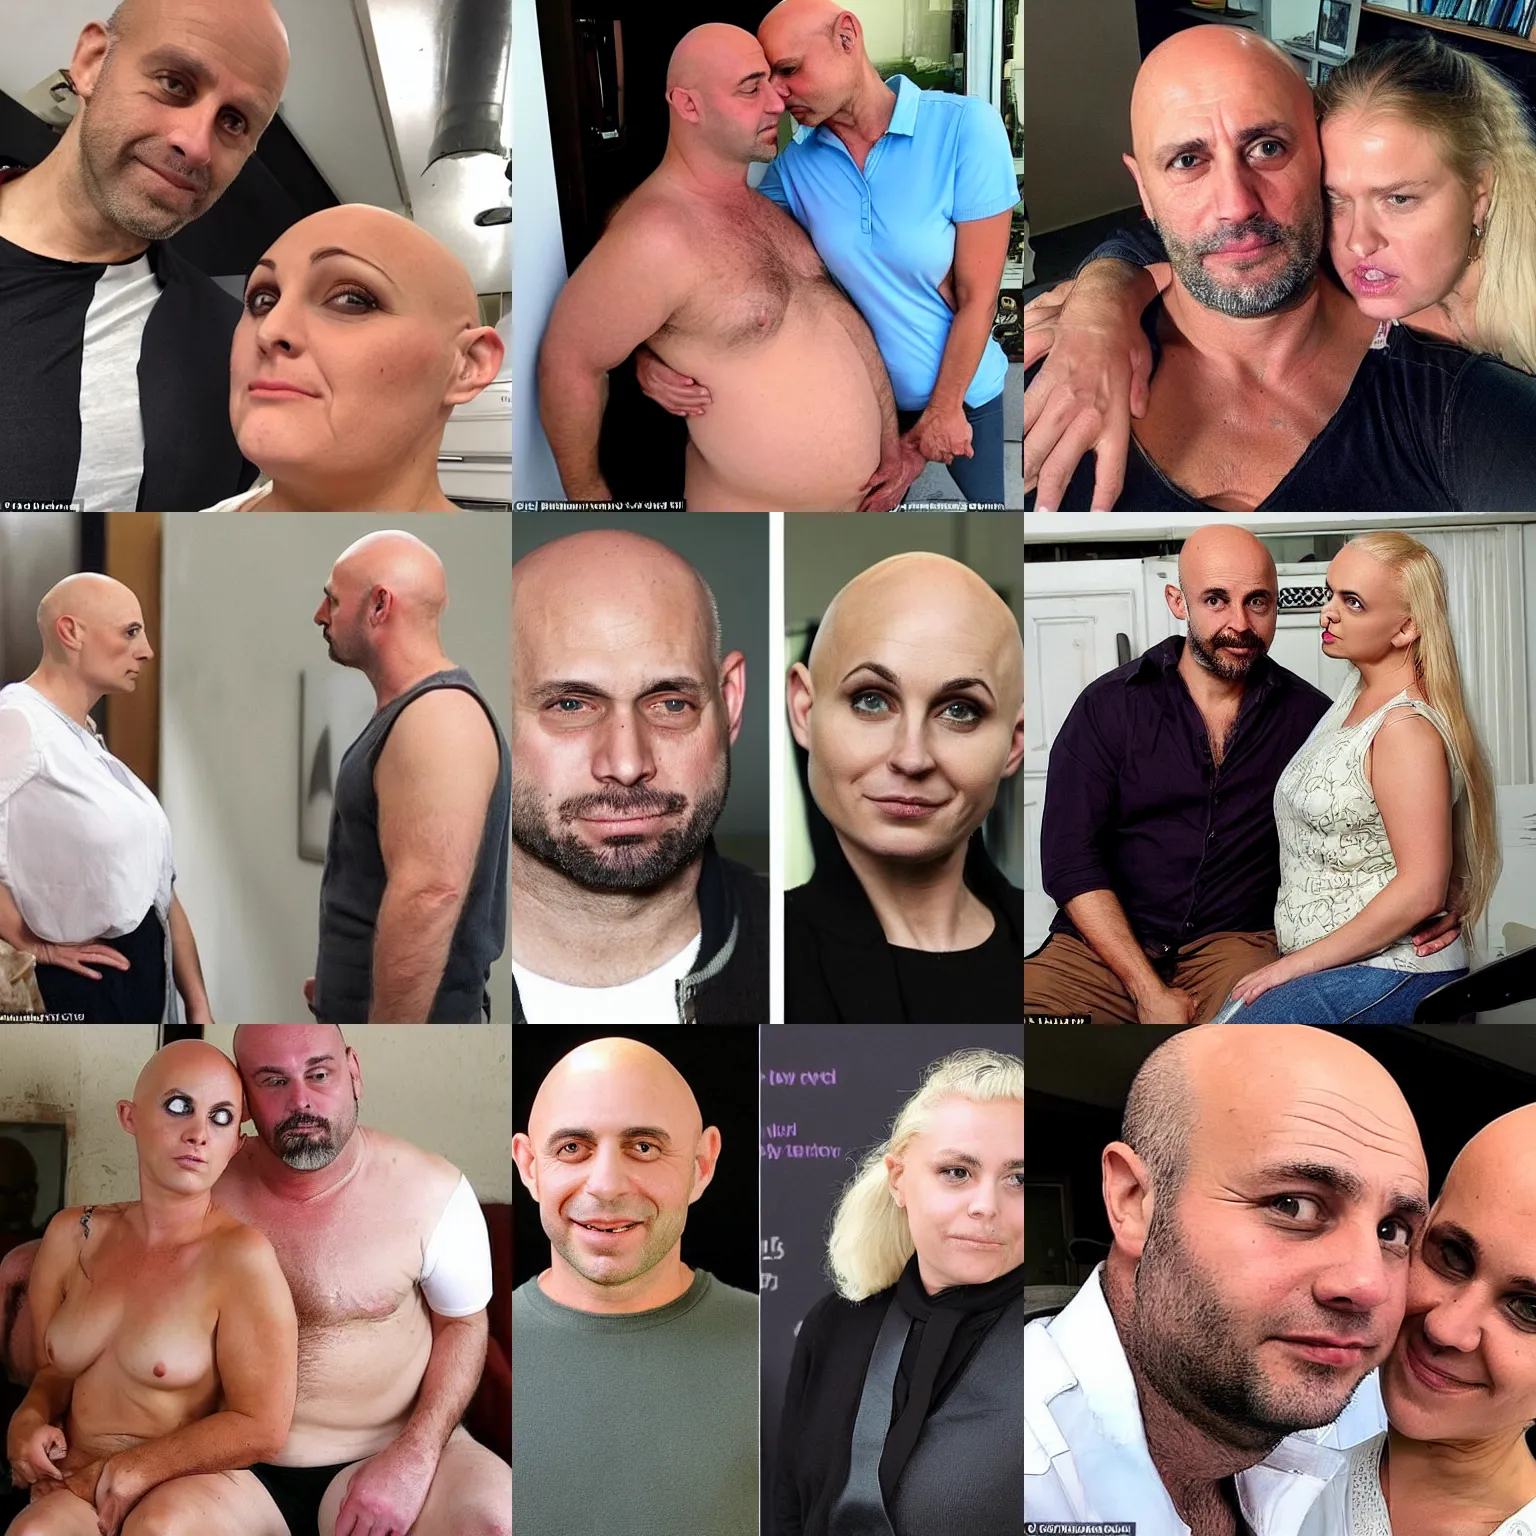 Prompt: rat - faced bald weak austrian - looking dude with a creepy obsession with his much younger married overweight and soul - drained female blonde colleague